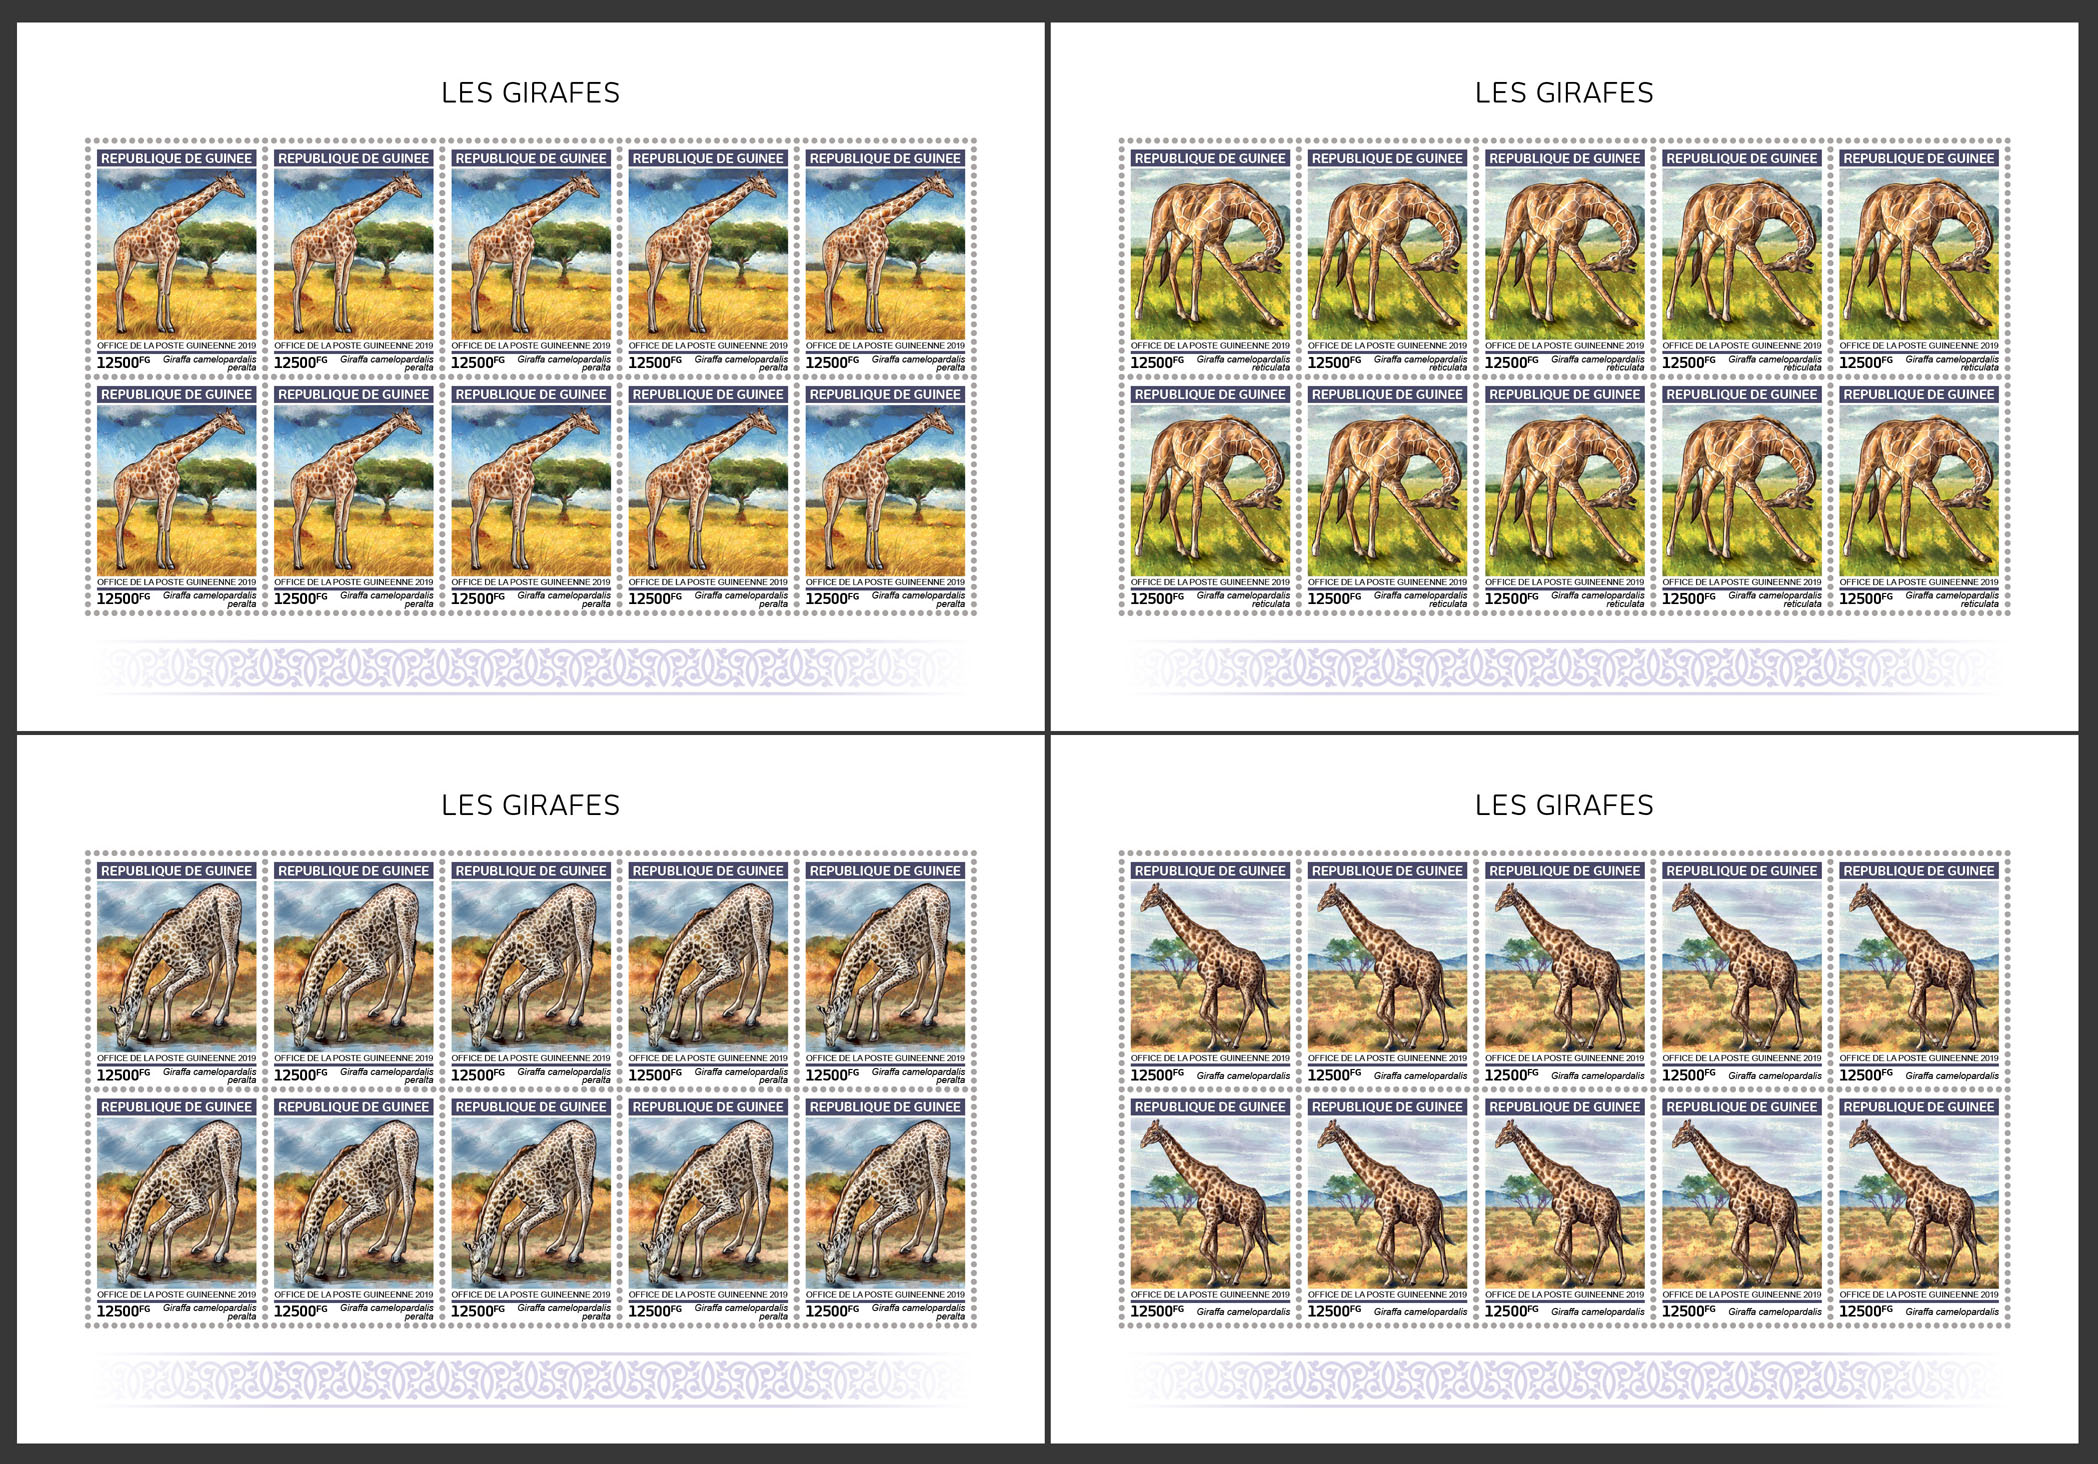 Giraffes - Issue of Guinée postage stamps